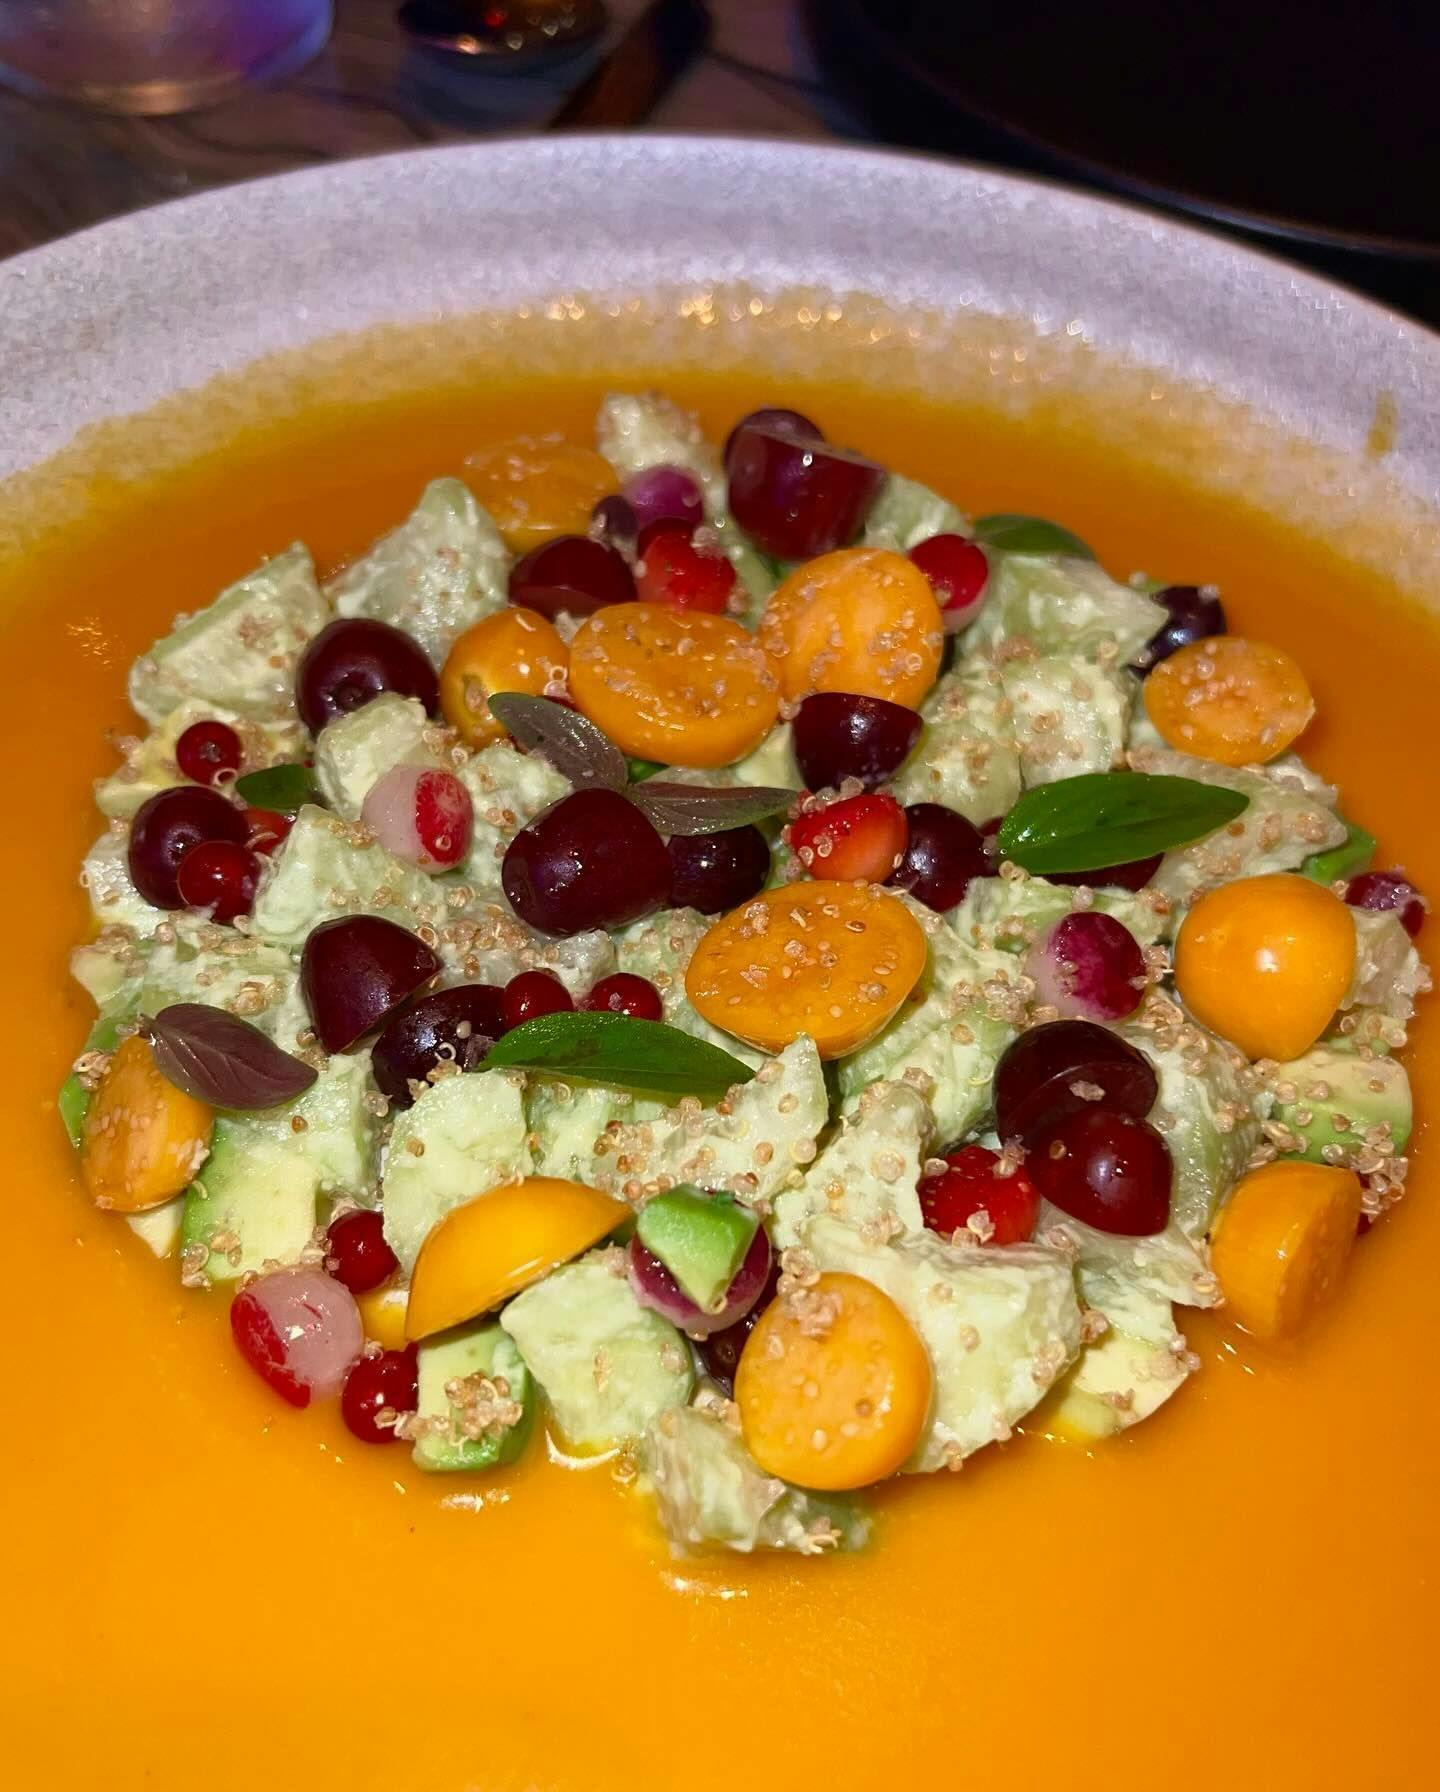 A vibrant salad featuring a medley of fresh fruits, vegetables, and quinoa artistically presented in a bowl, showcasing the type of healthy, gourmet dishes available through Booked in New York's best restaurants.